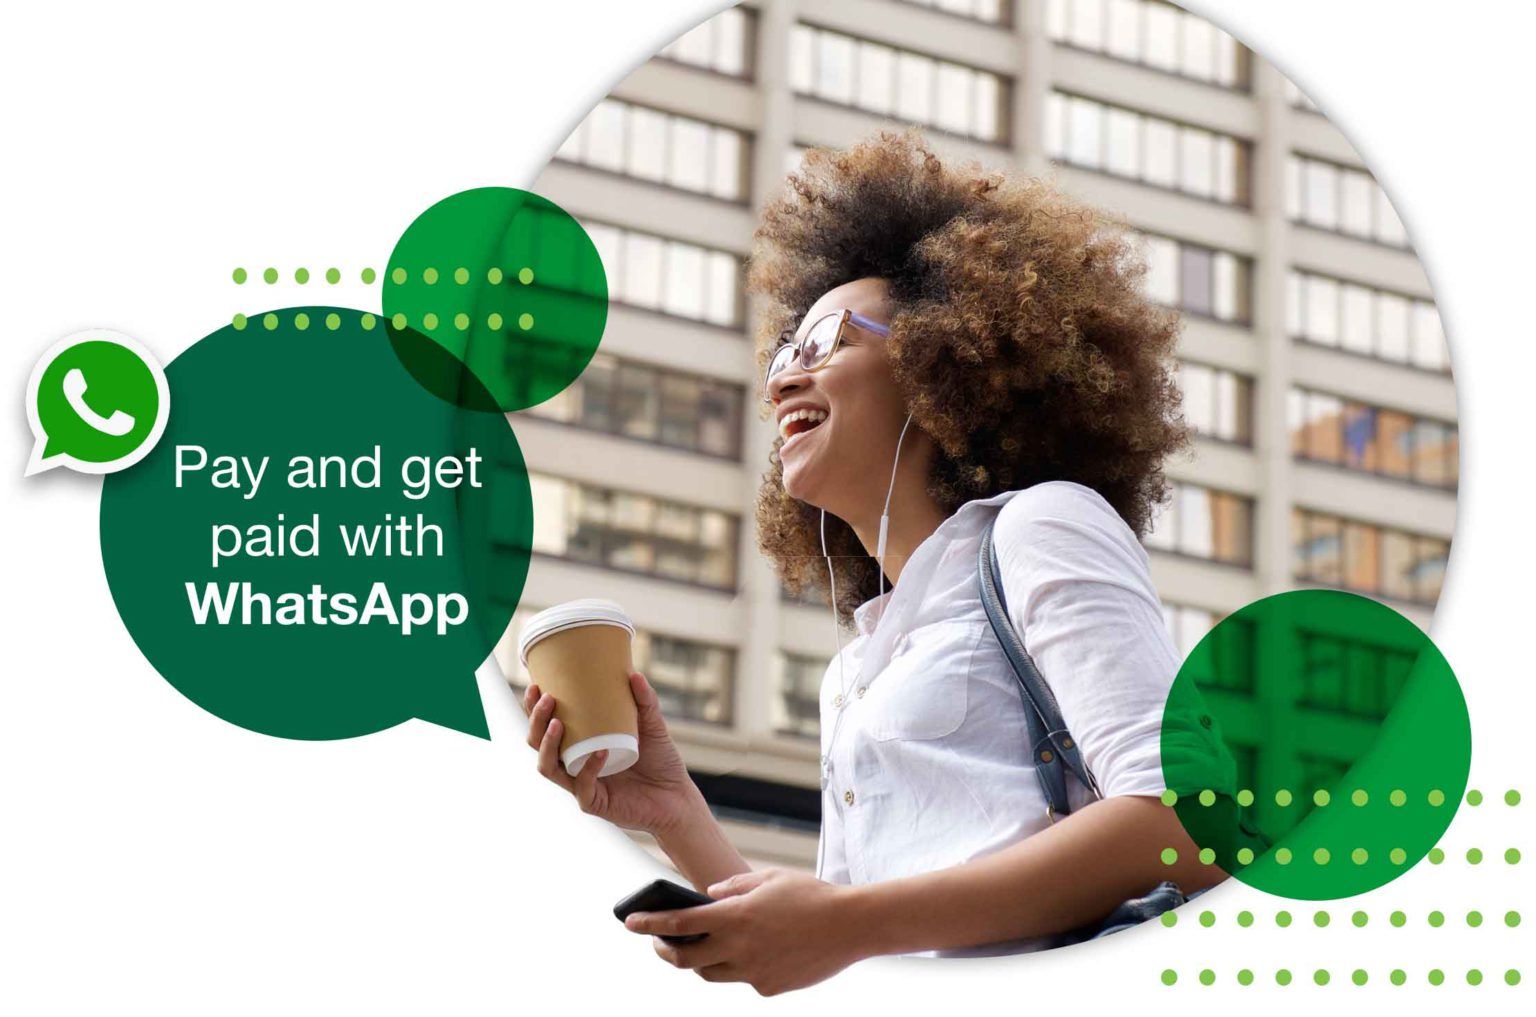 SA fintech, Nedbank launches payment feature that allows users send and receive payments on WhatsApp